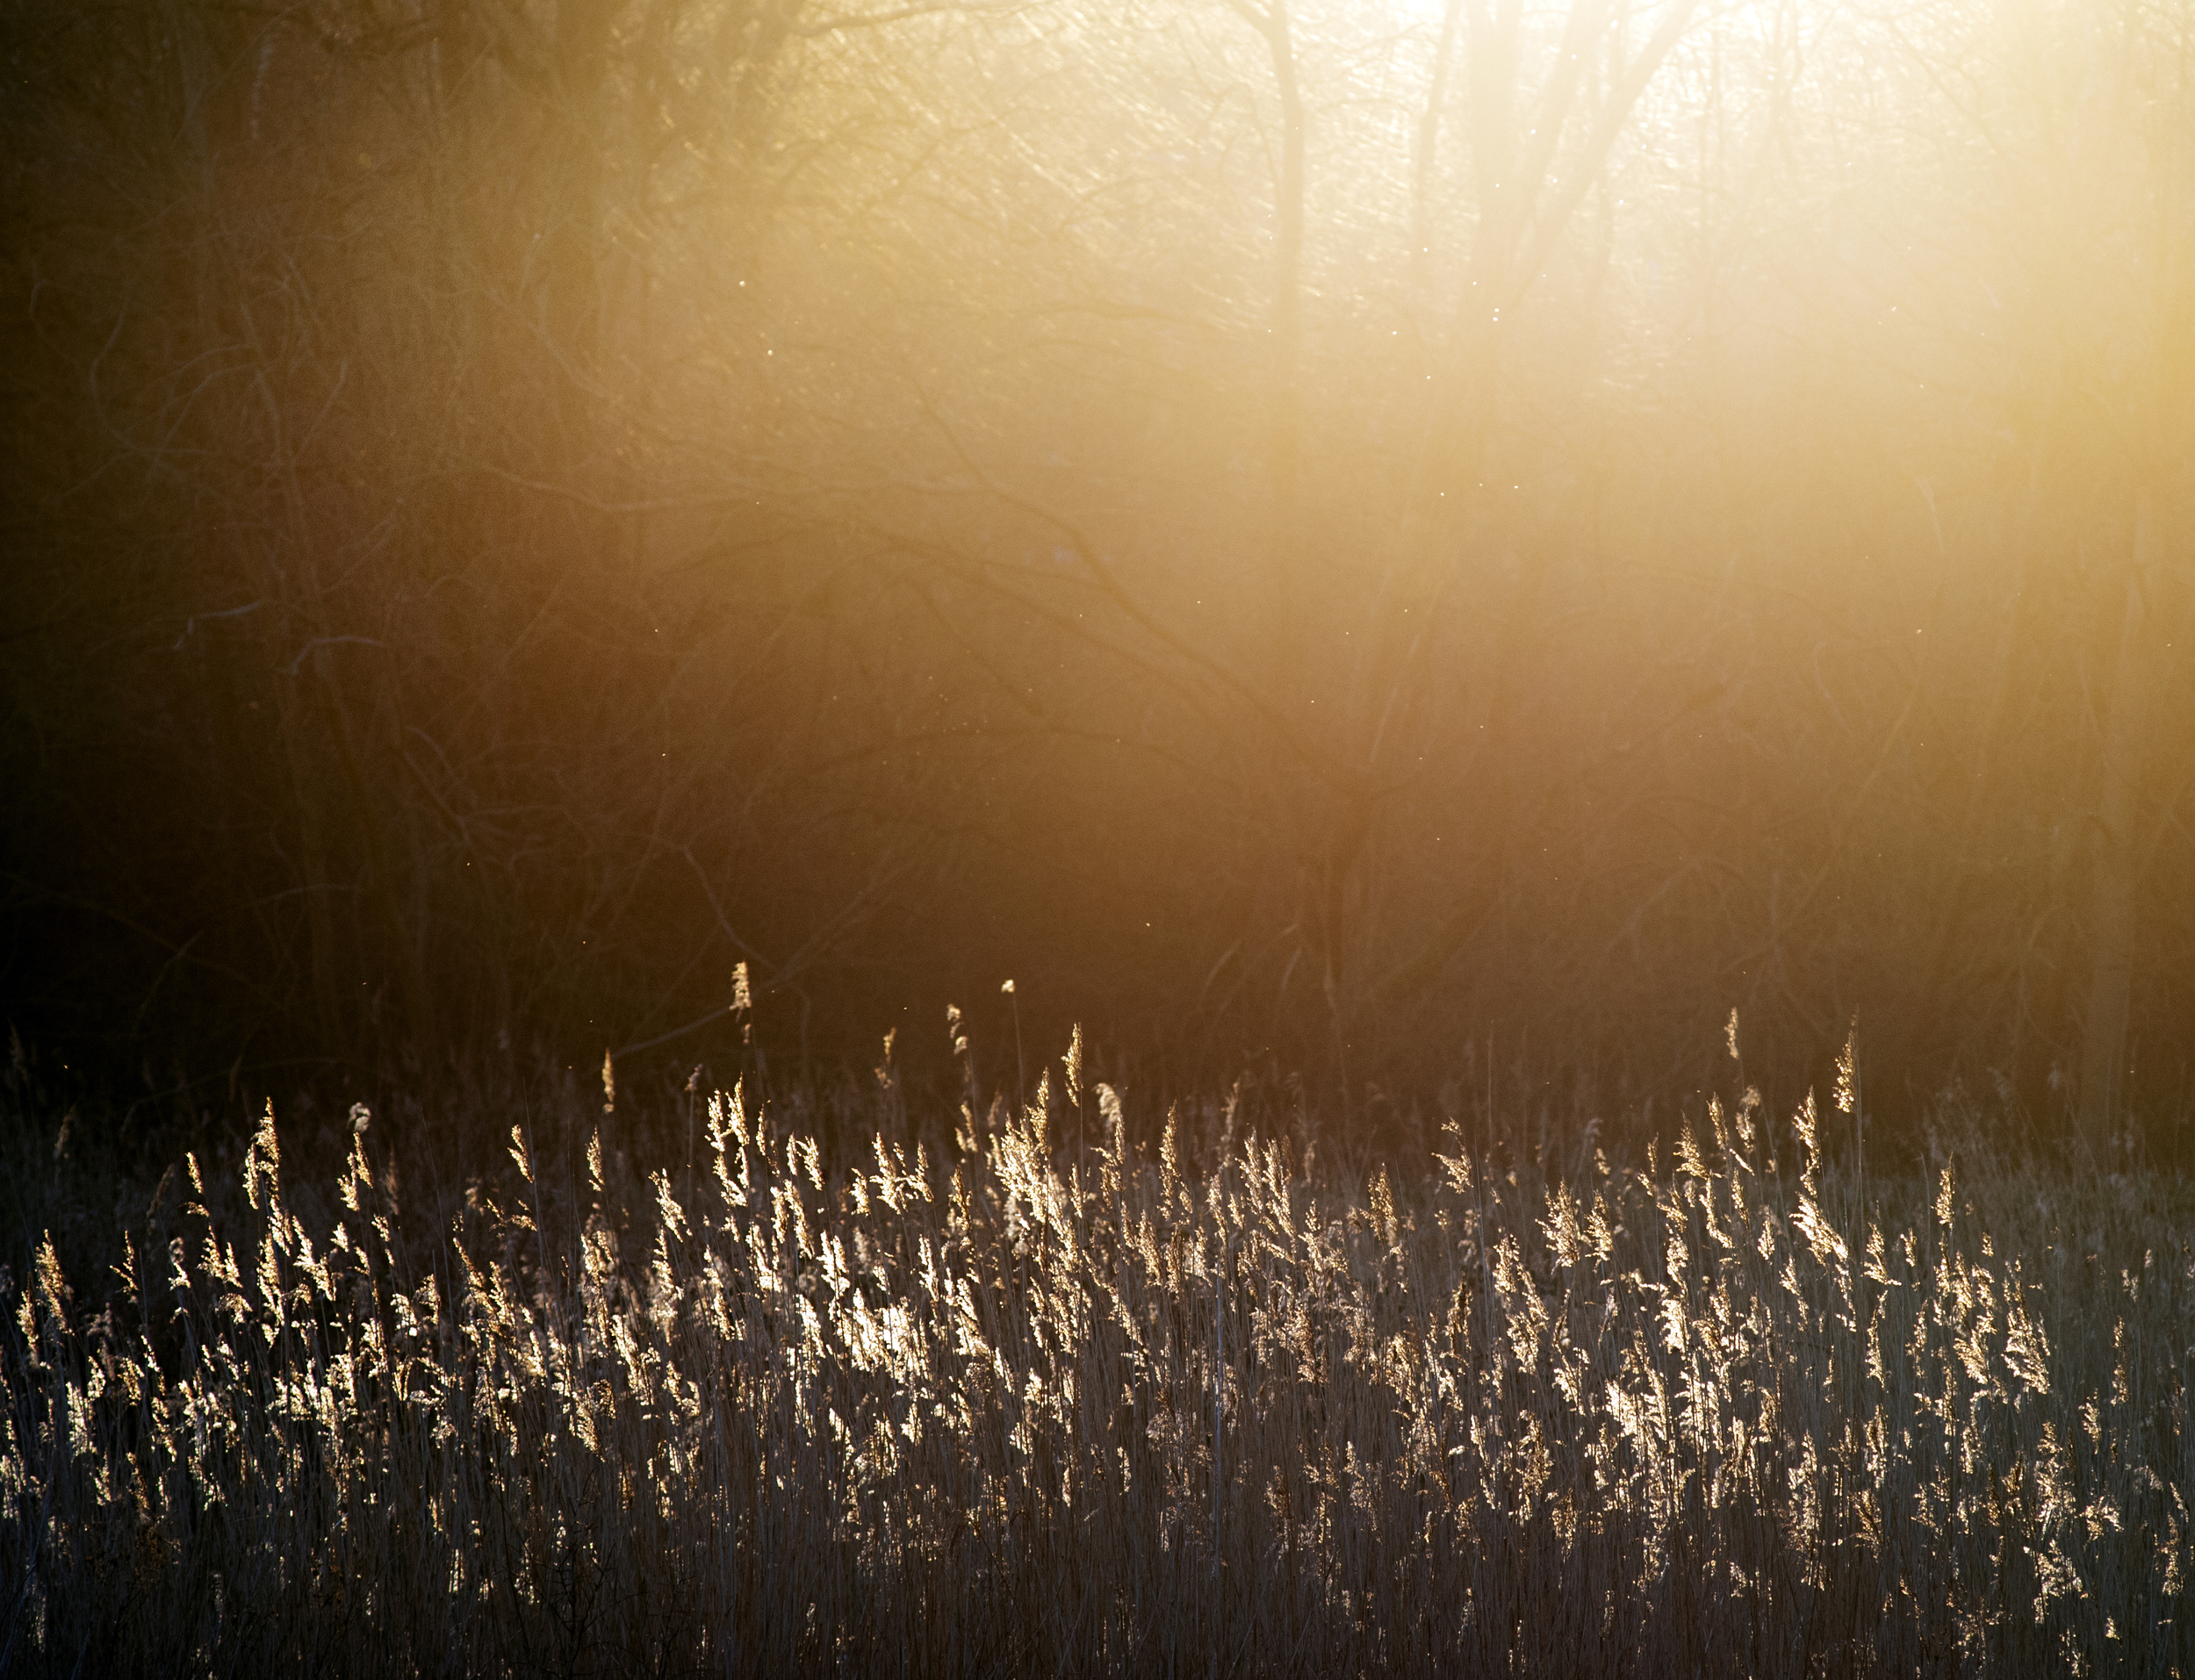 Sun coming through trees in heart of reeds.jpg